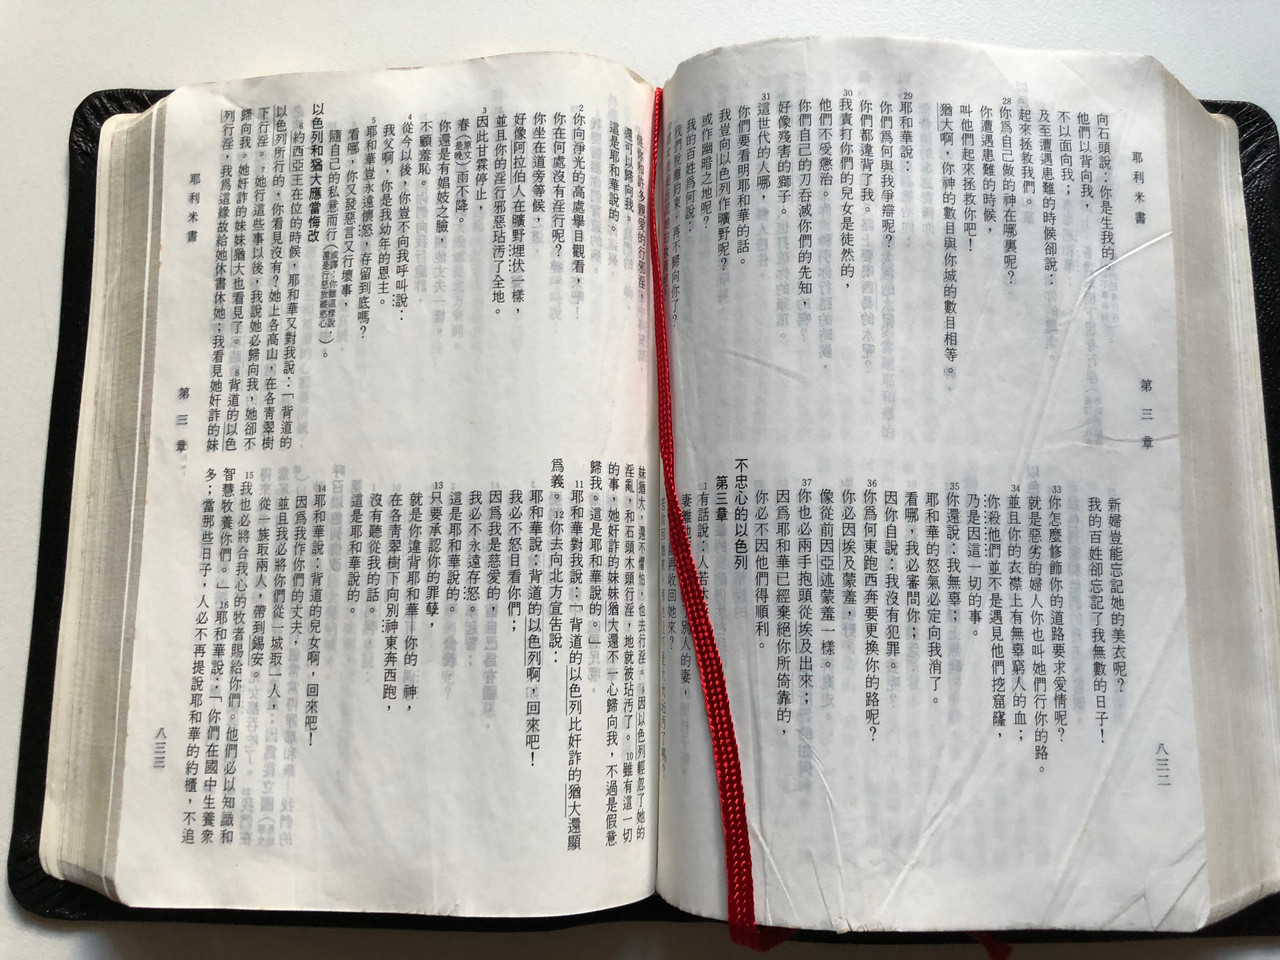 https://cdn10.bigcommerce.com/s-62bdpkt7pb/products/50544/images/257800/Chinese_Holy_Bible_-_Vertical_8__02279.1667631584.1280.1280.JPG?c=2